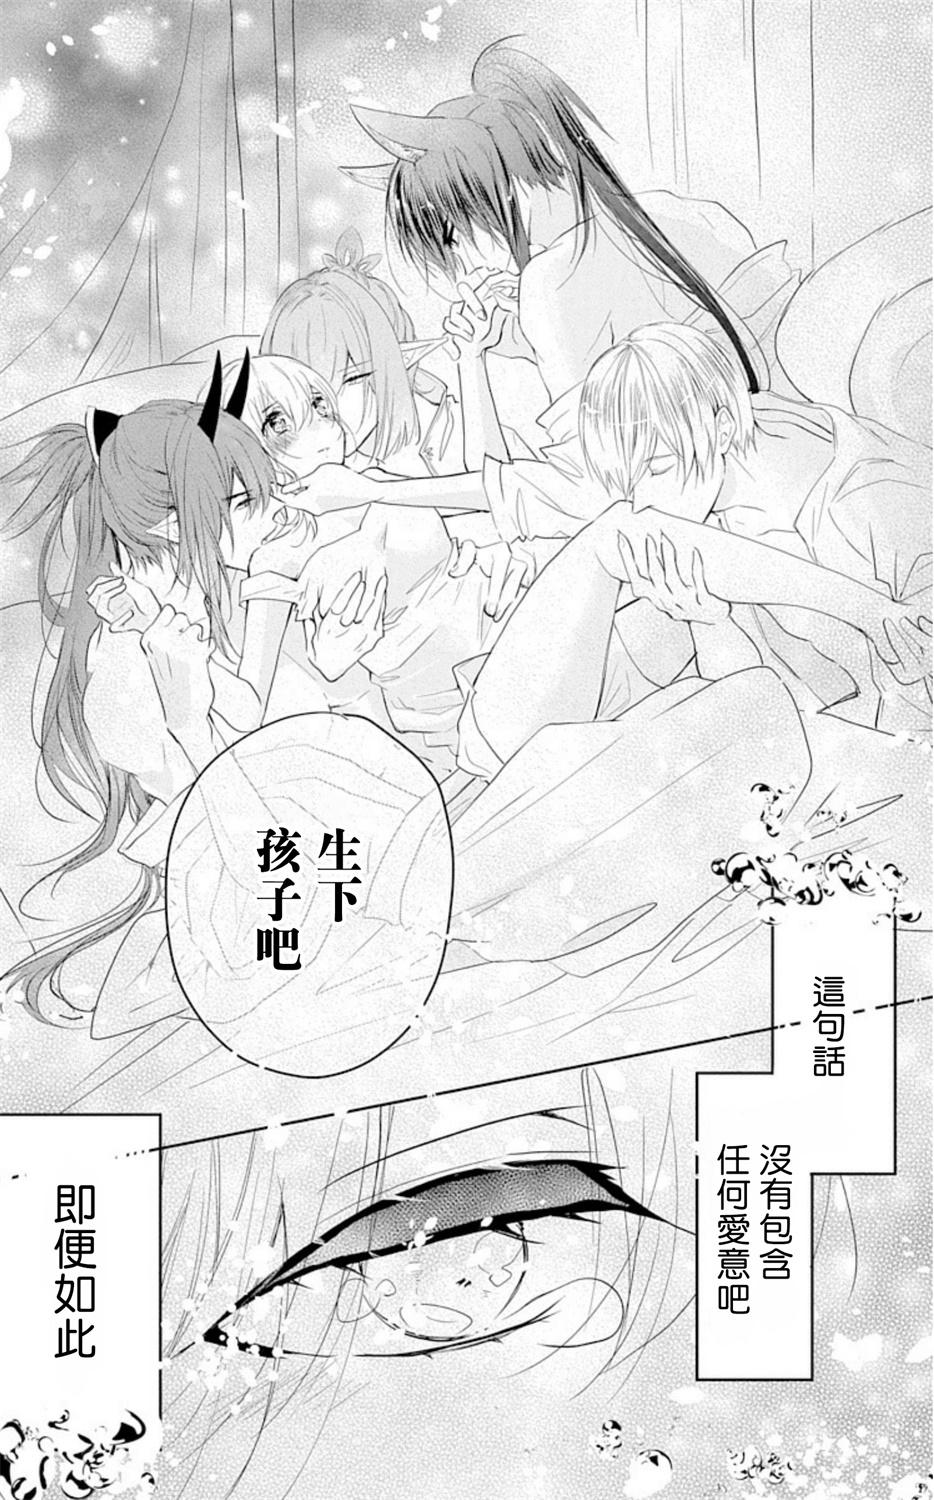 Hot Whores out bride —异族婚姻— 01-02 Chinese Shower - Page 5